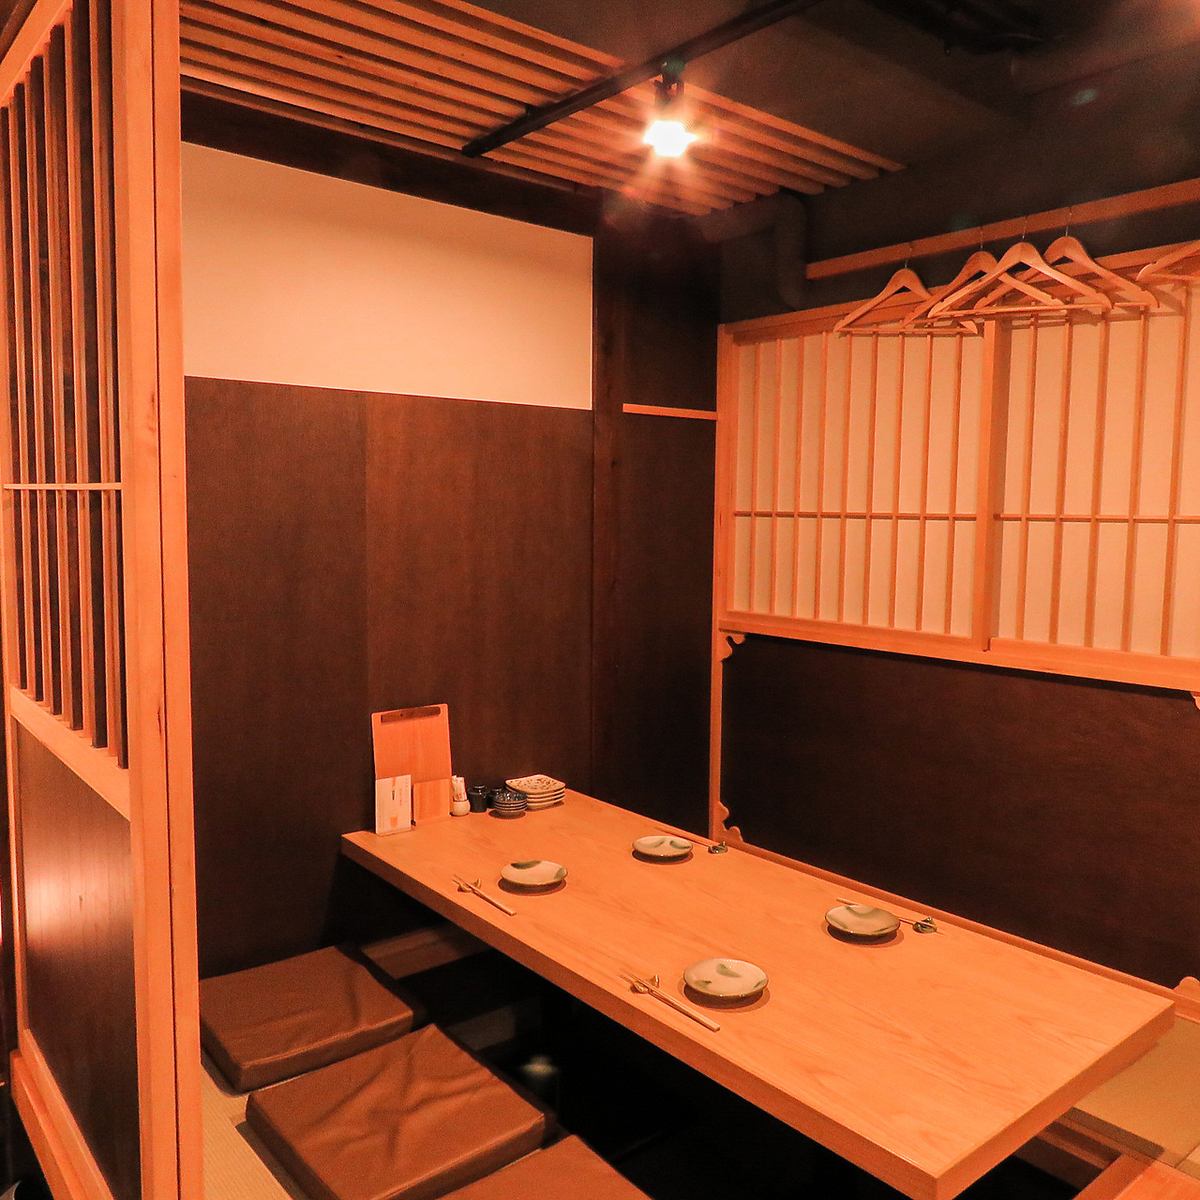 We have prepared spacious sunken kotatsu seats where you can spend a luxurious time.